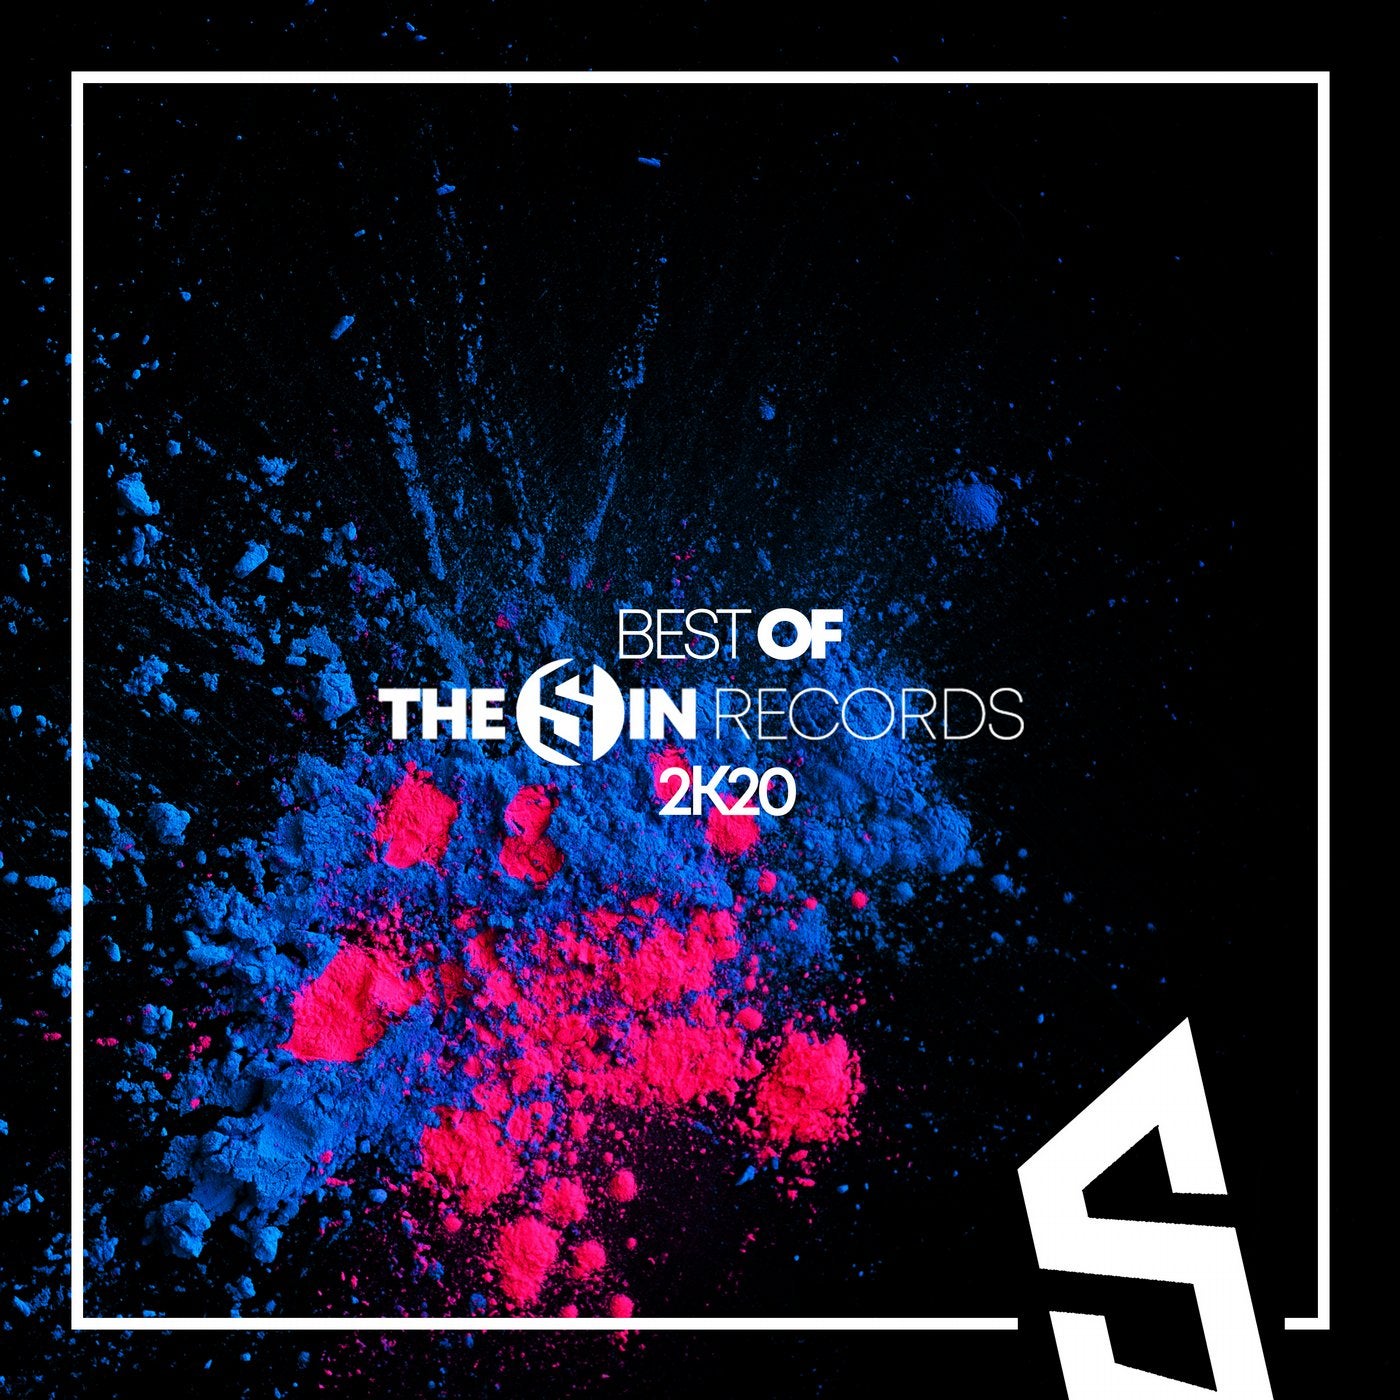 Best of the Sin Records 2K20